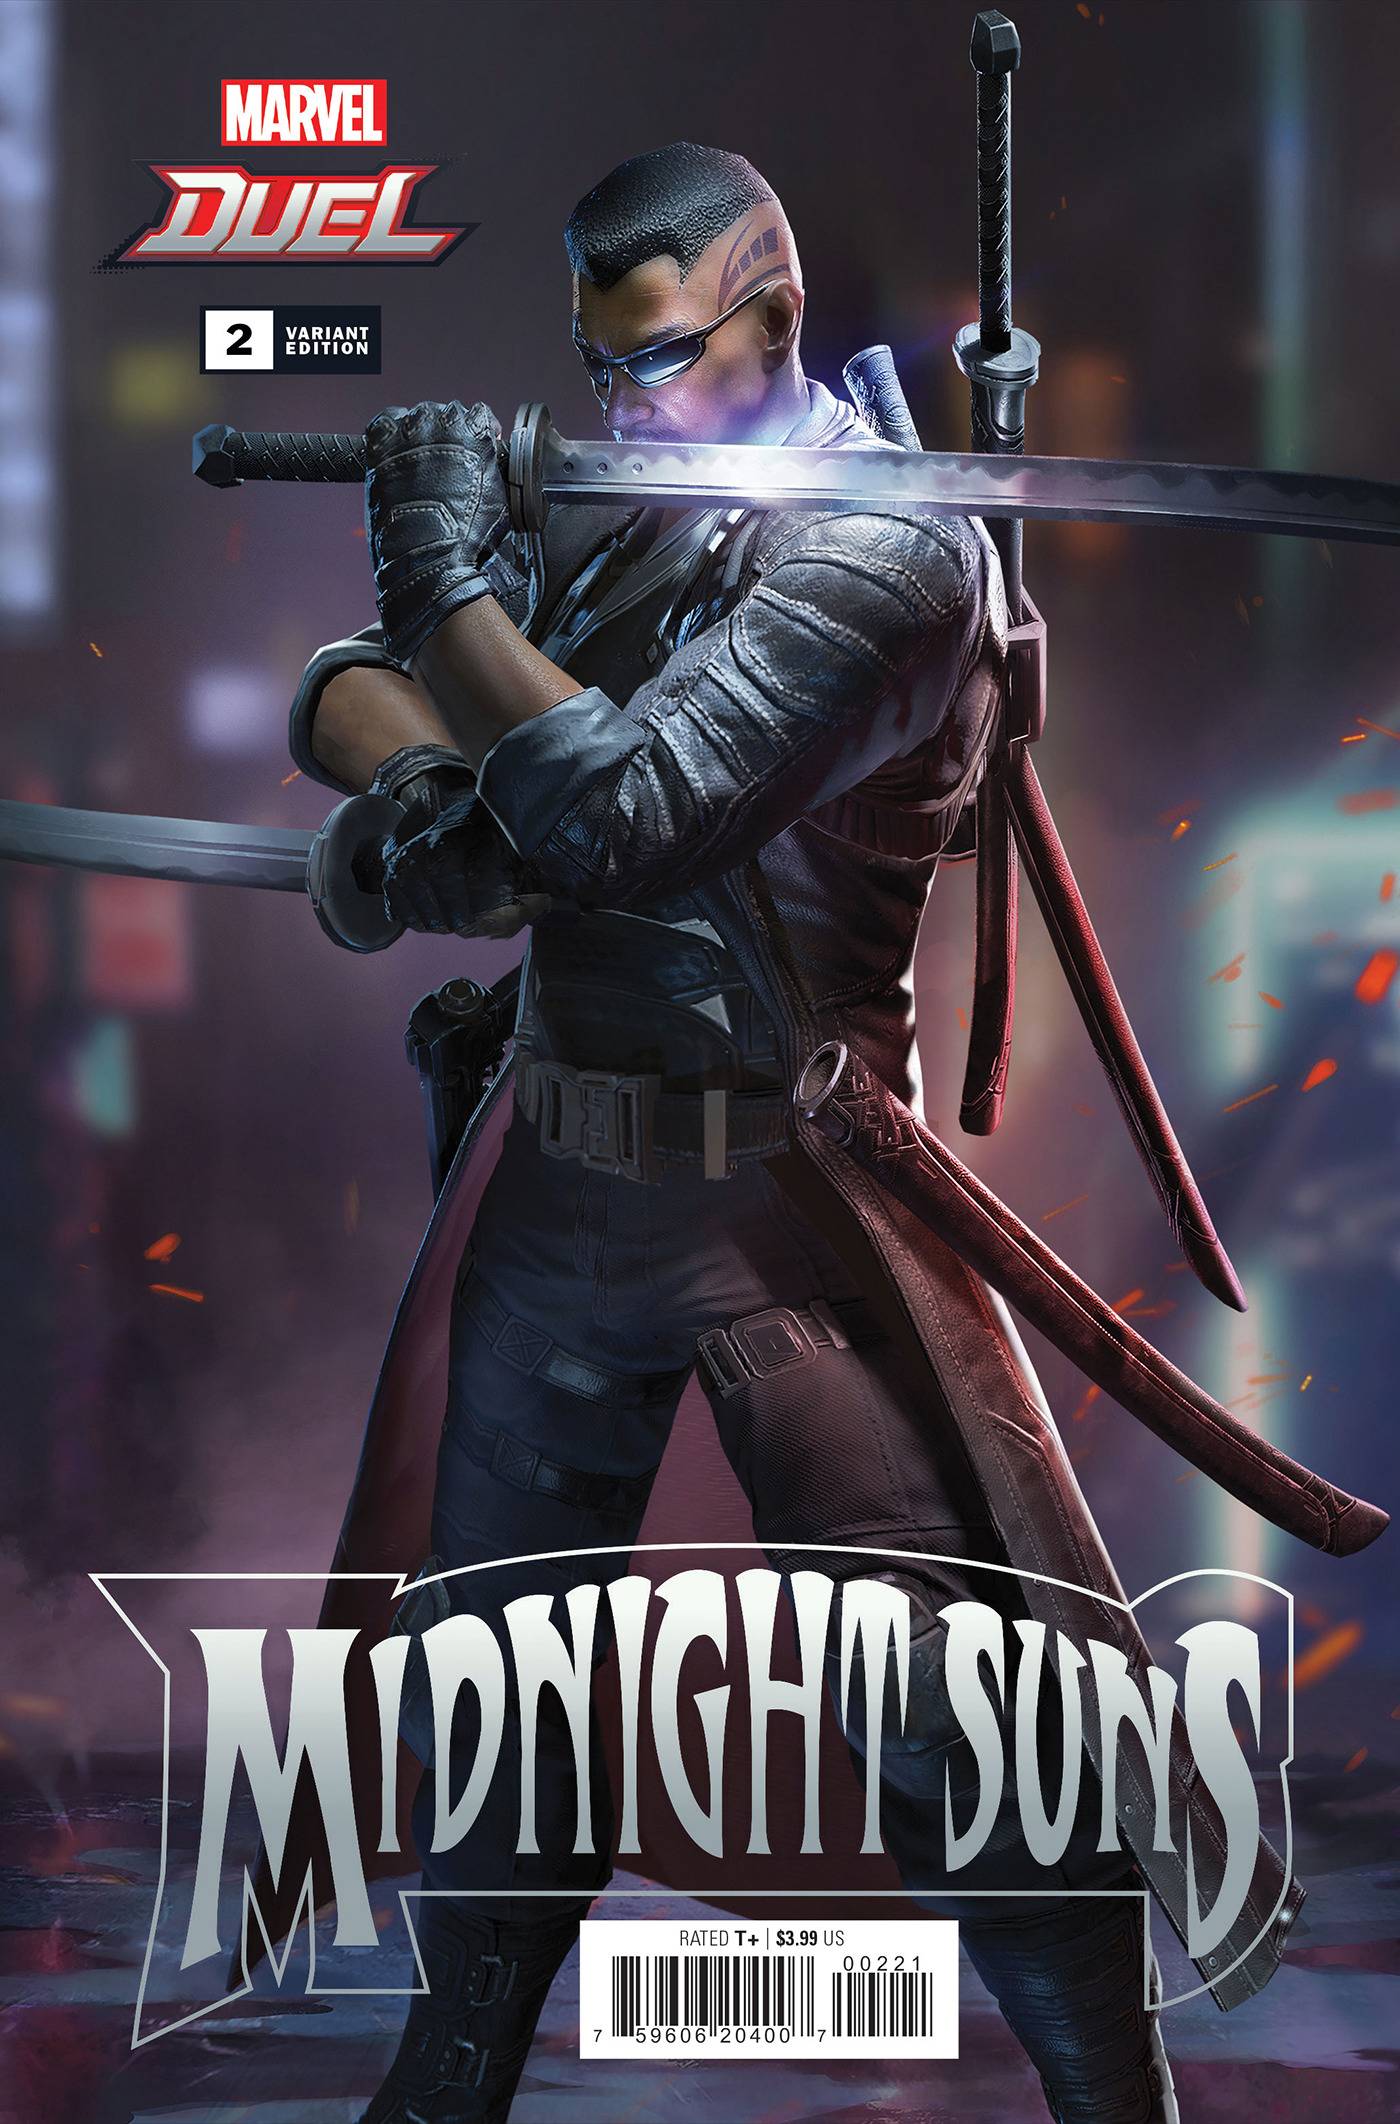 10/19/2022 MIDNIGHT SUNS #2 (OF 5) NETEASE GAMES VARIANT